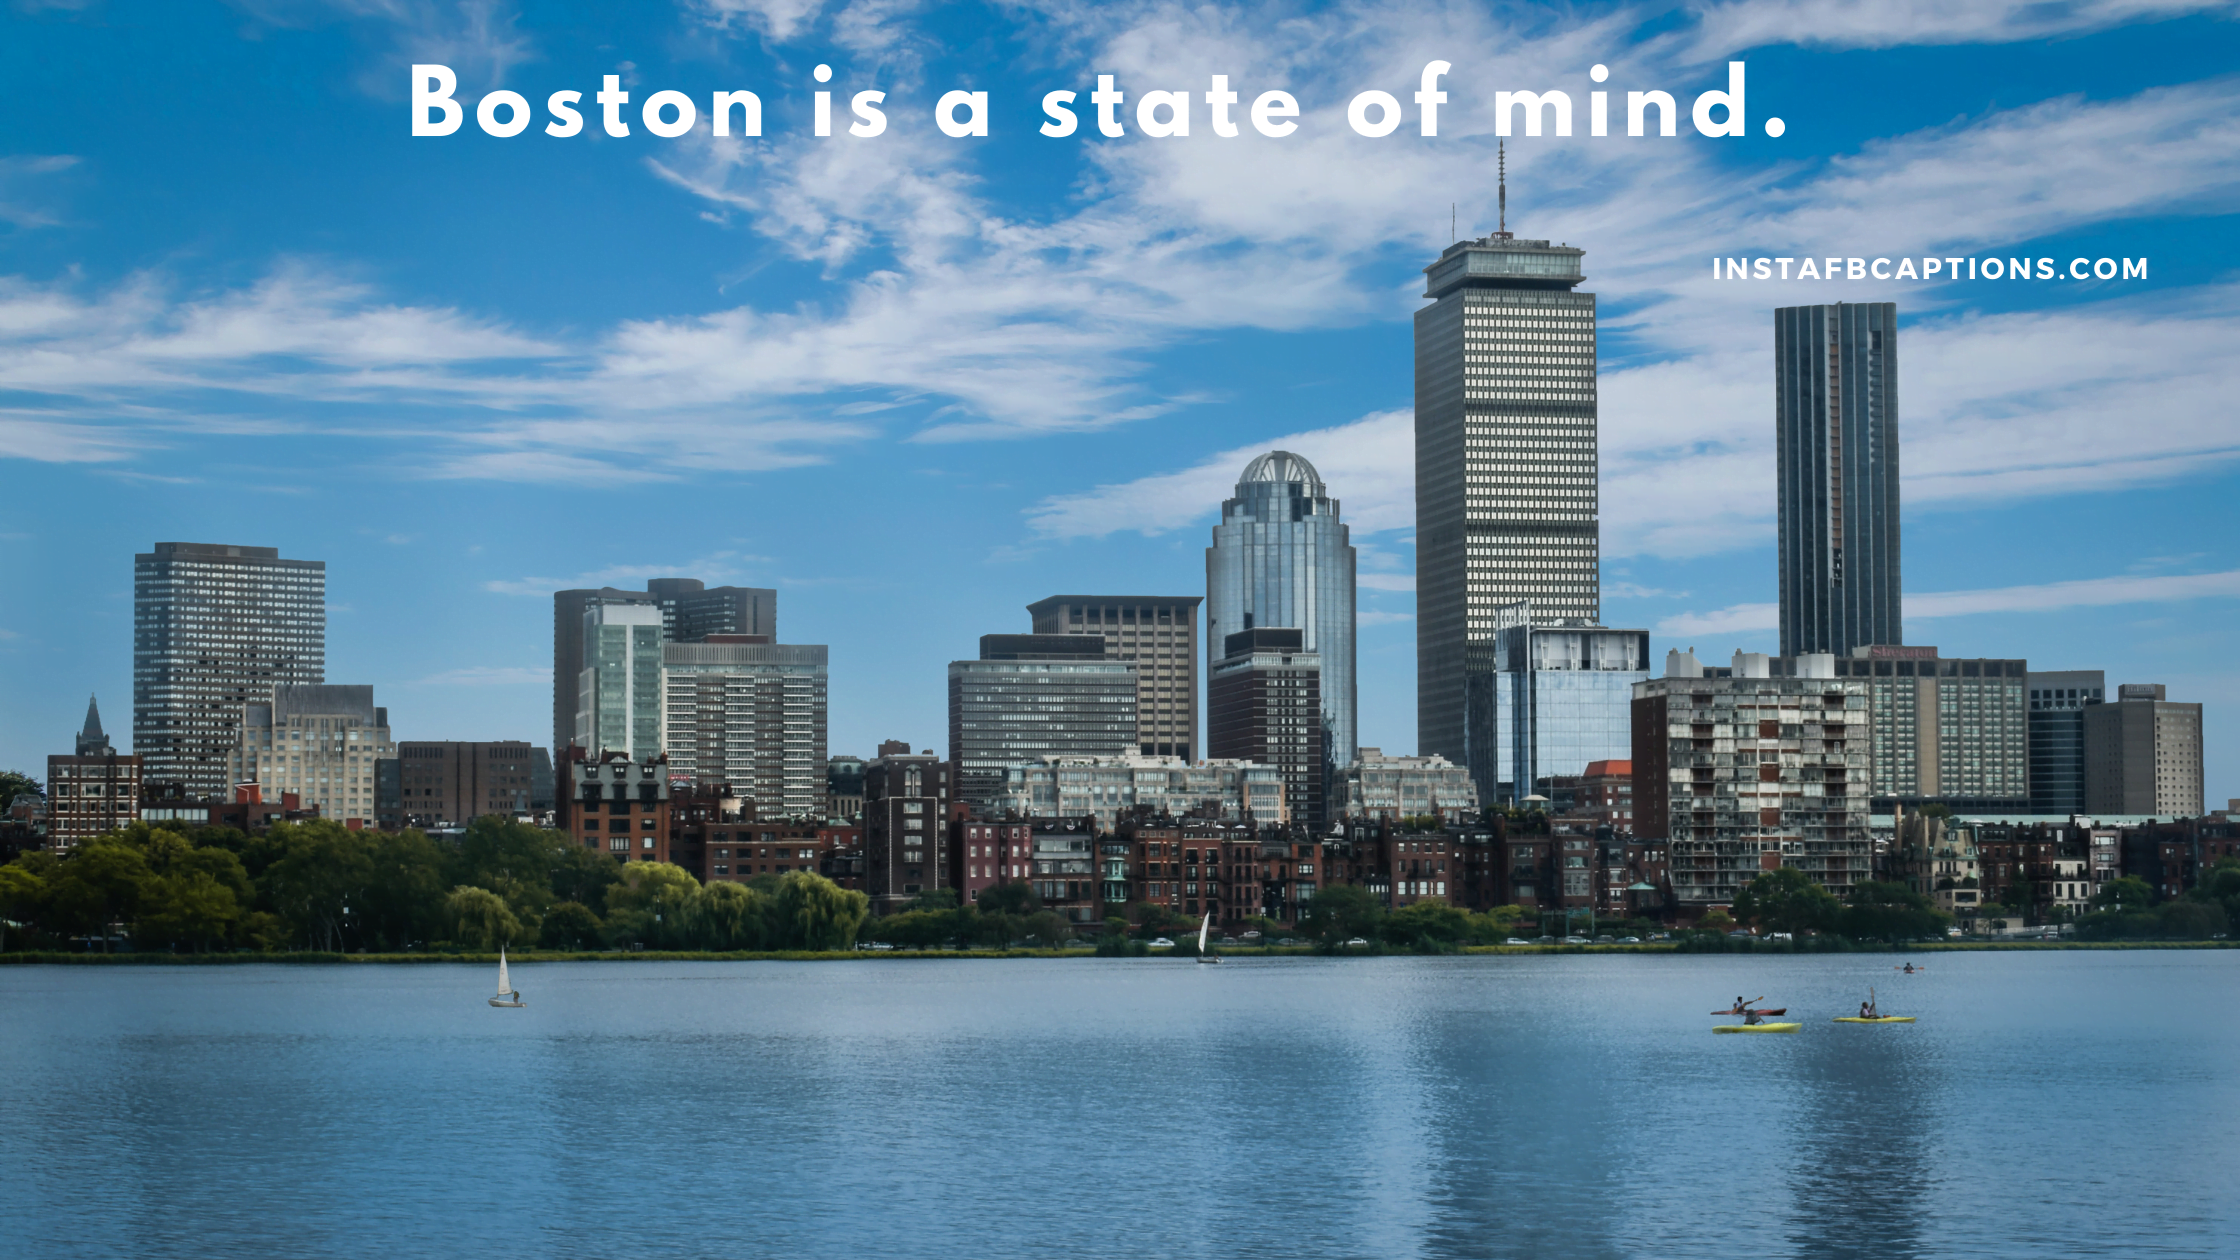 Short Boston Quotes About Massachusetts  - Short Boston Quotes About Massachusetts - 167 Boston Instagram Captions Quotes in 2023